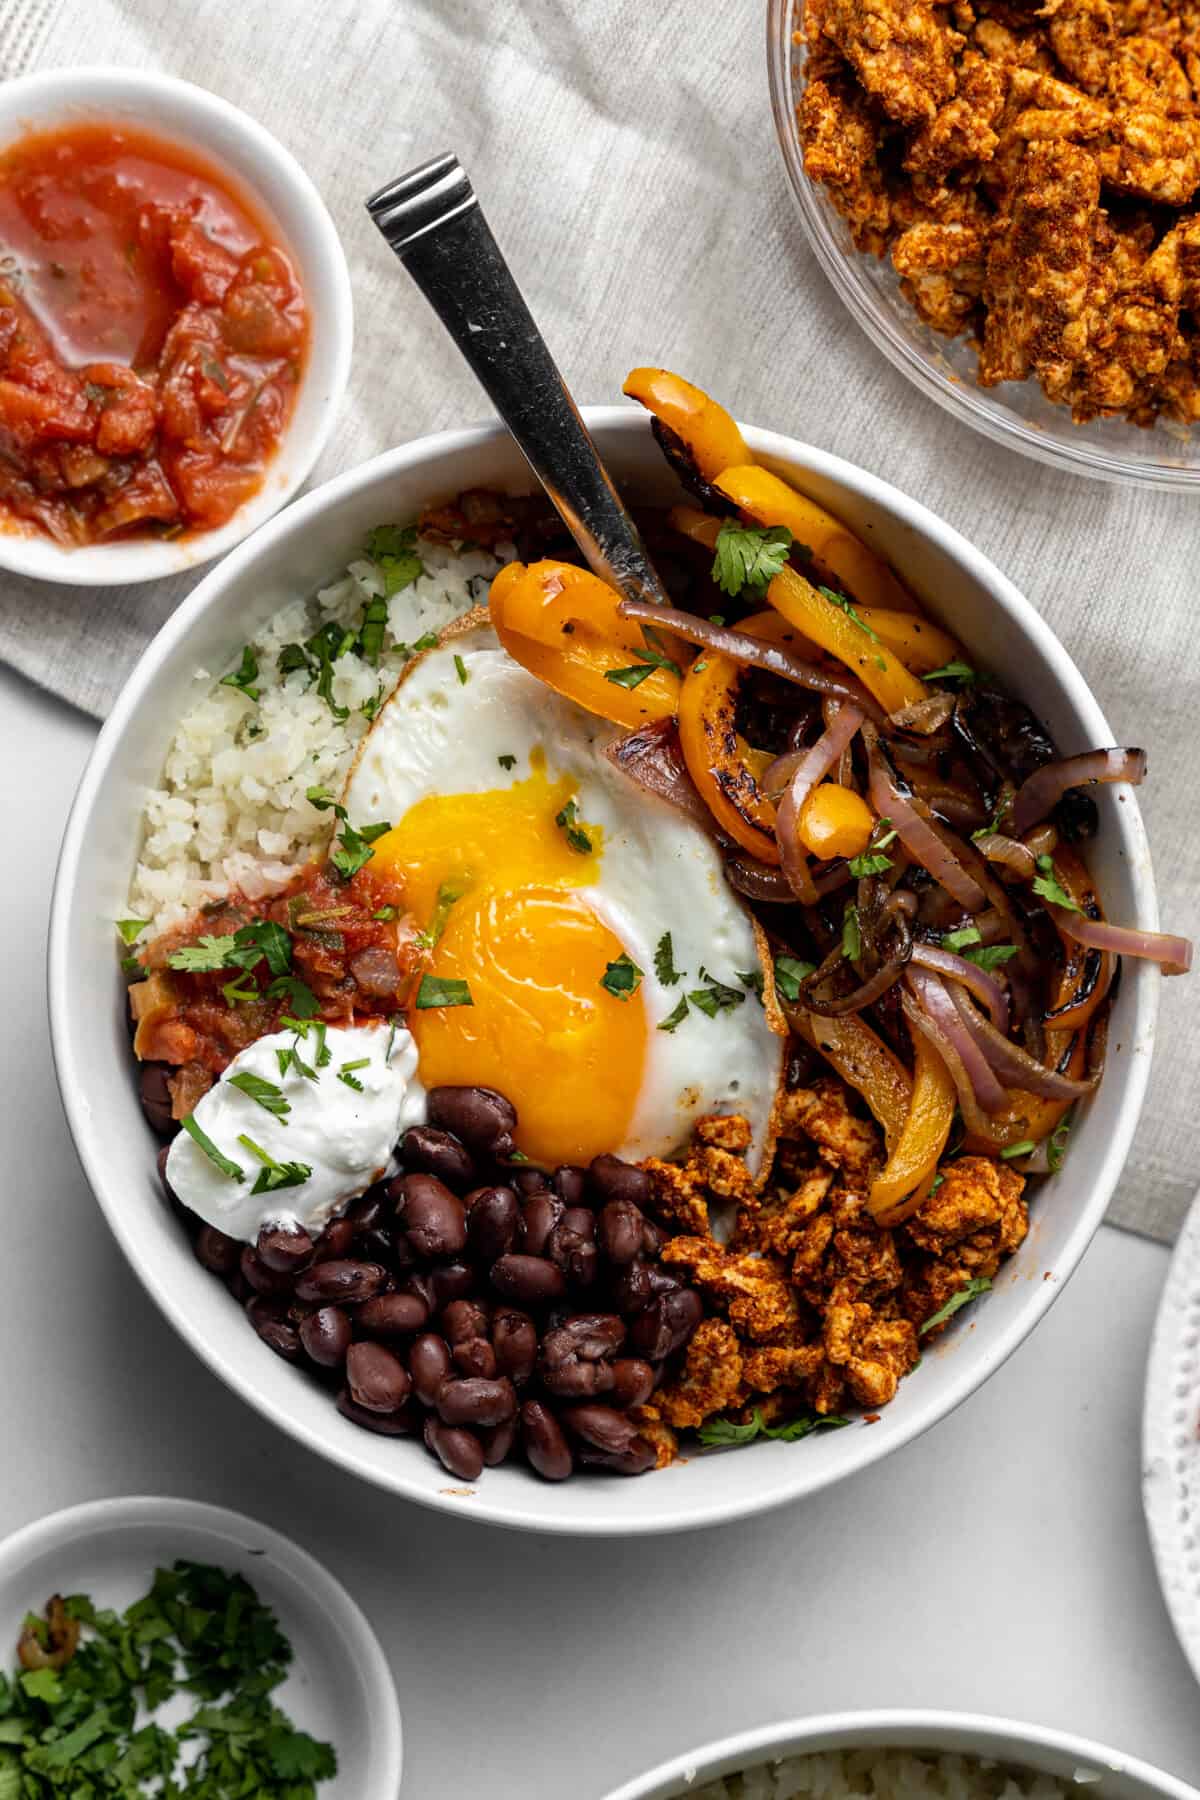 Breakfast burrito bowl with beans, egg, vegetables, and more.